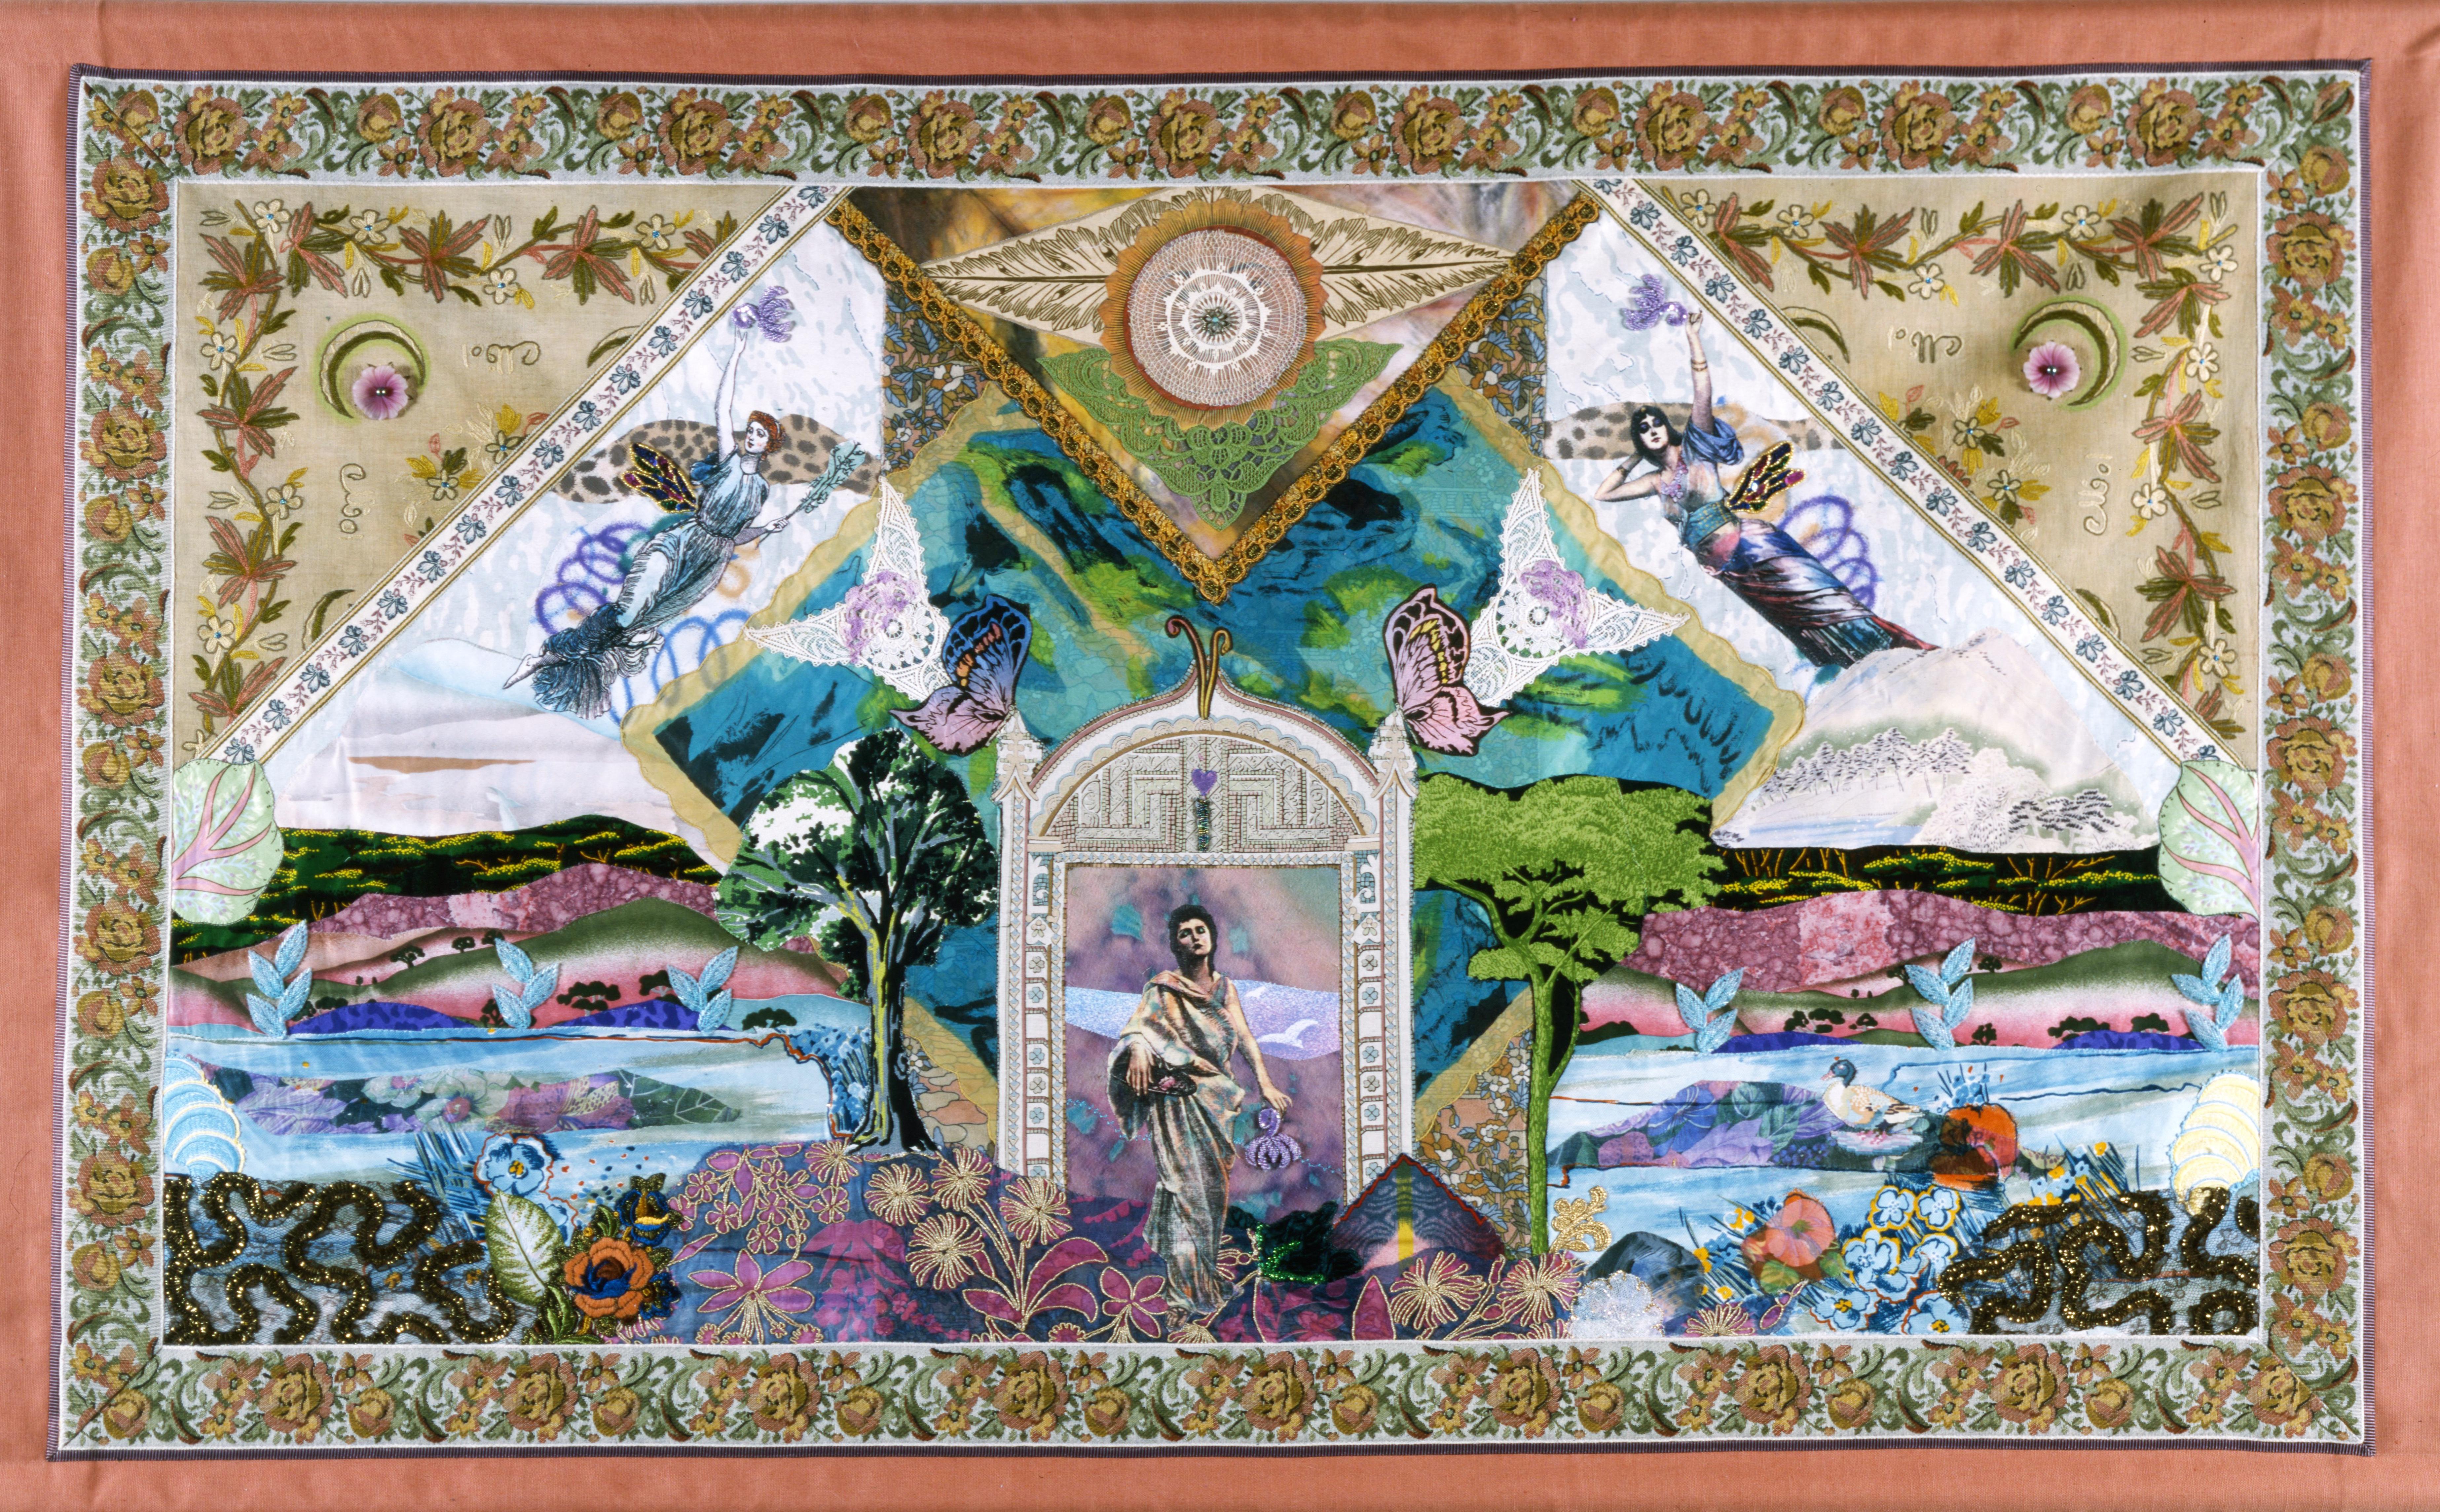 "Vision Quest" - Wall Hanging Tapestry by Amy Zerner